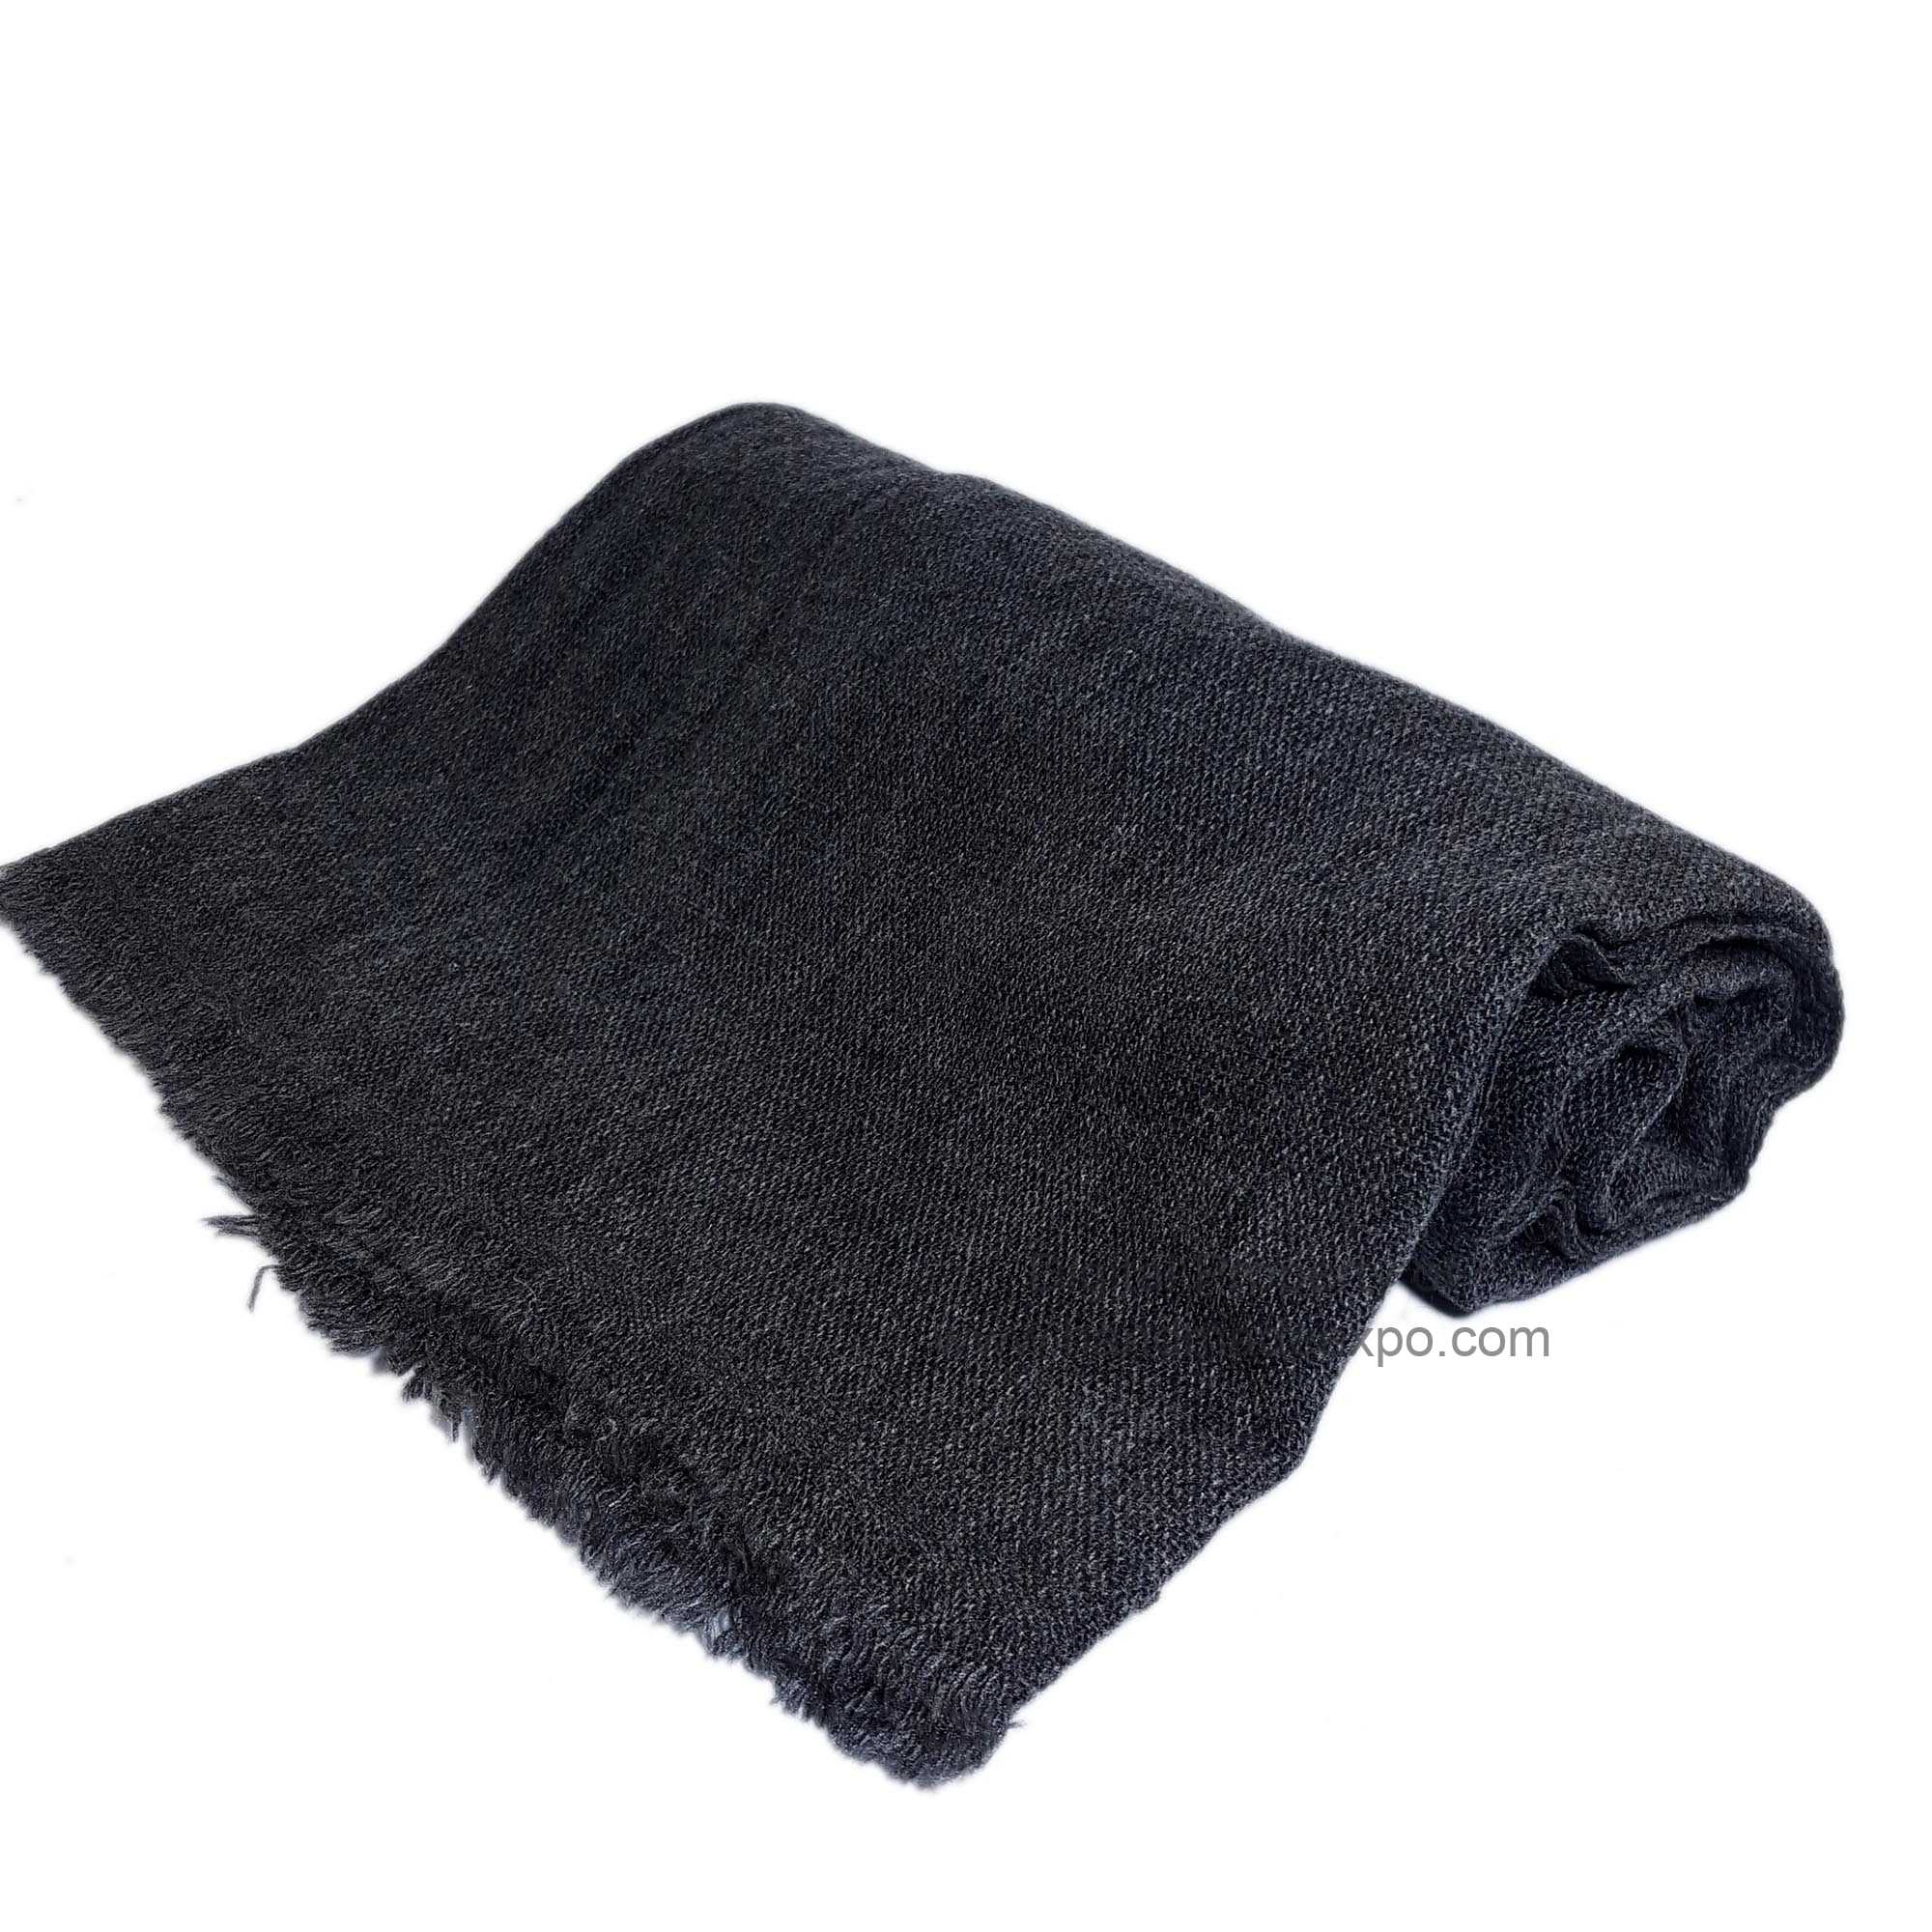 Pashmina Shawl, Nepali Handmade Shawl, In Four Ply Wool, Color Dye black Color